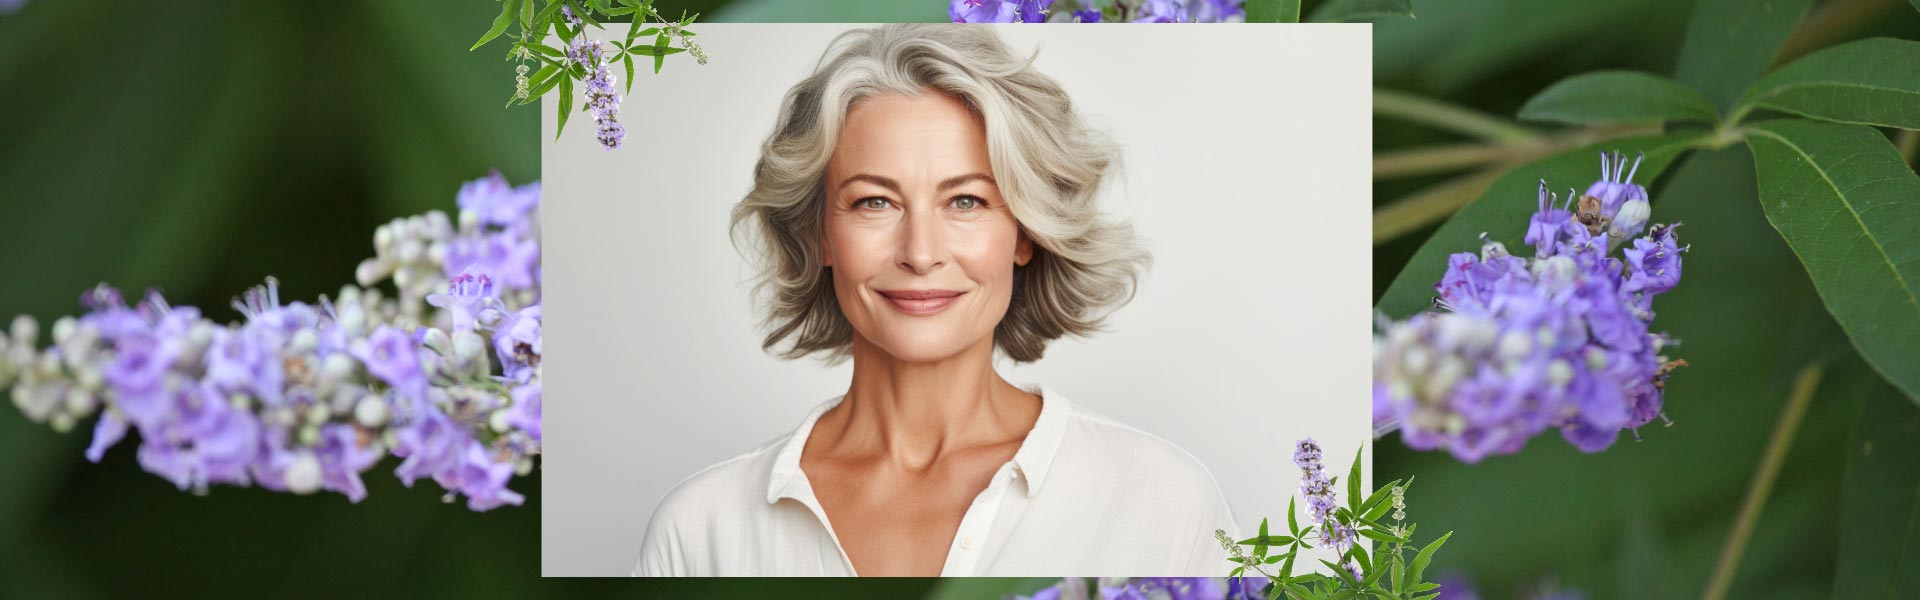 A background of the Mediterranean plant Vitex agnus castus and a middle aged beautiful woman with grey hair smiling confident